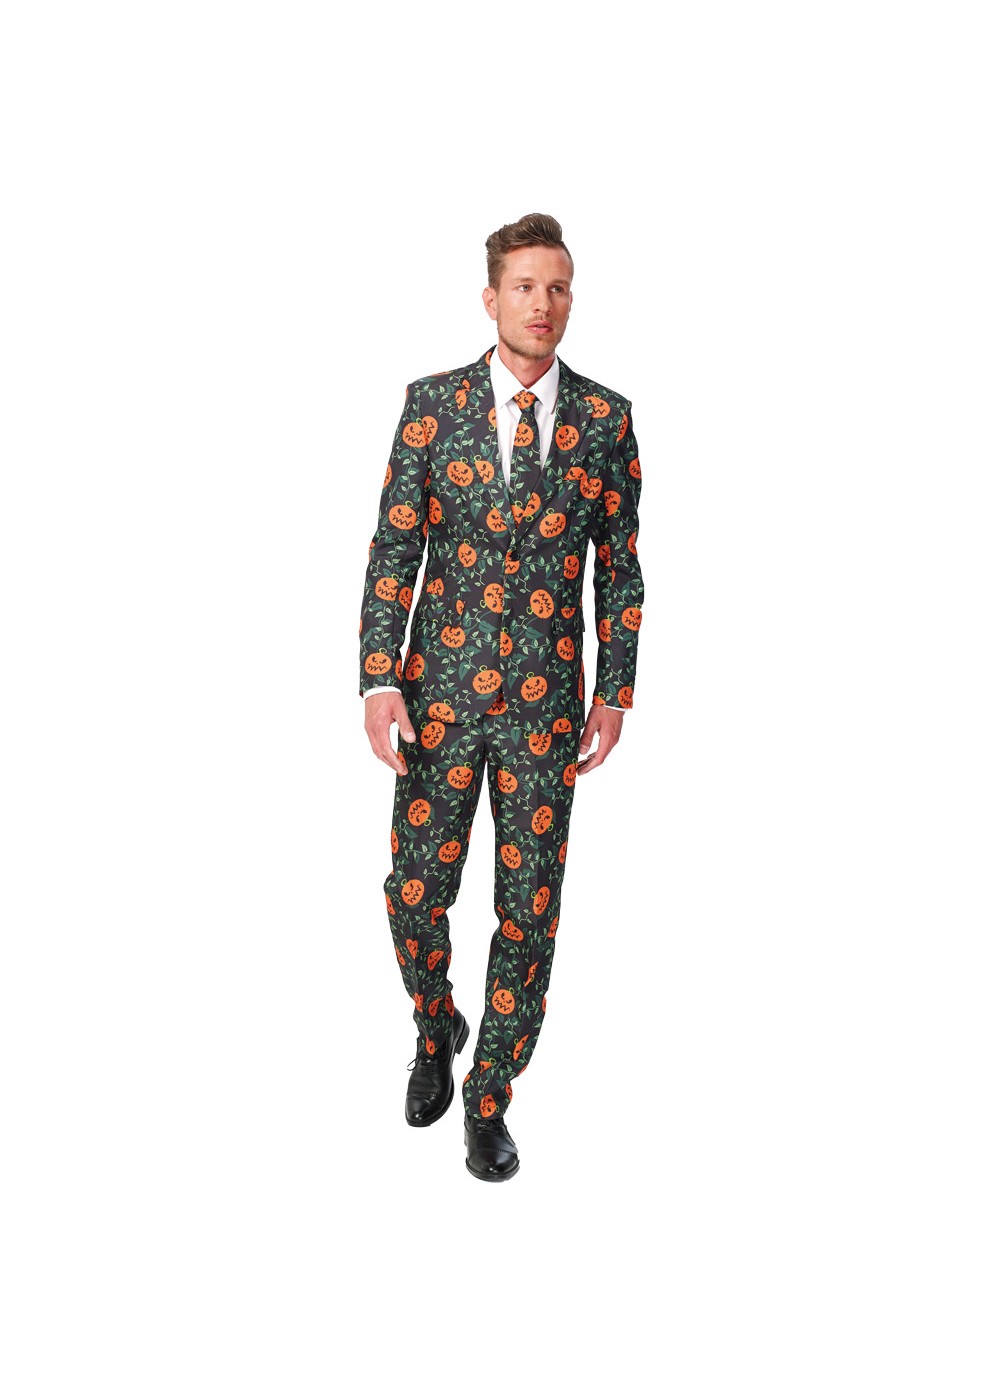 Pumpkin Suit - Holiday Costumes